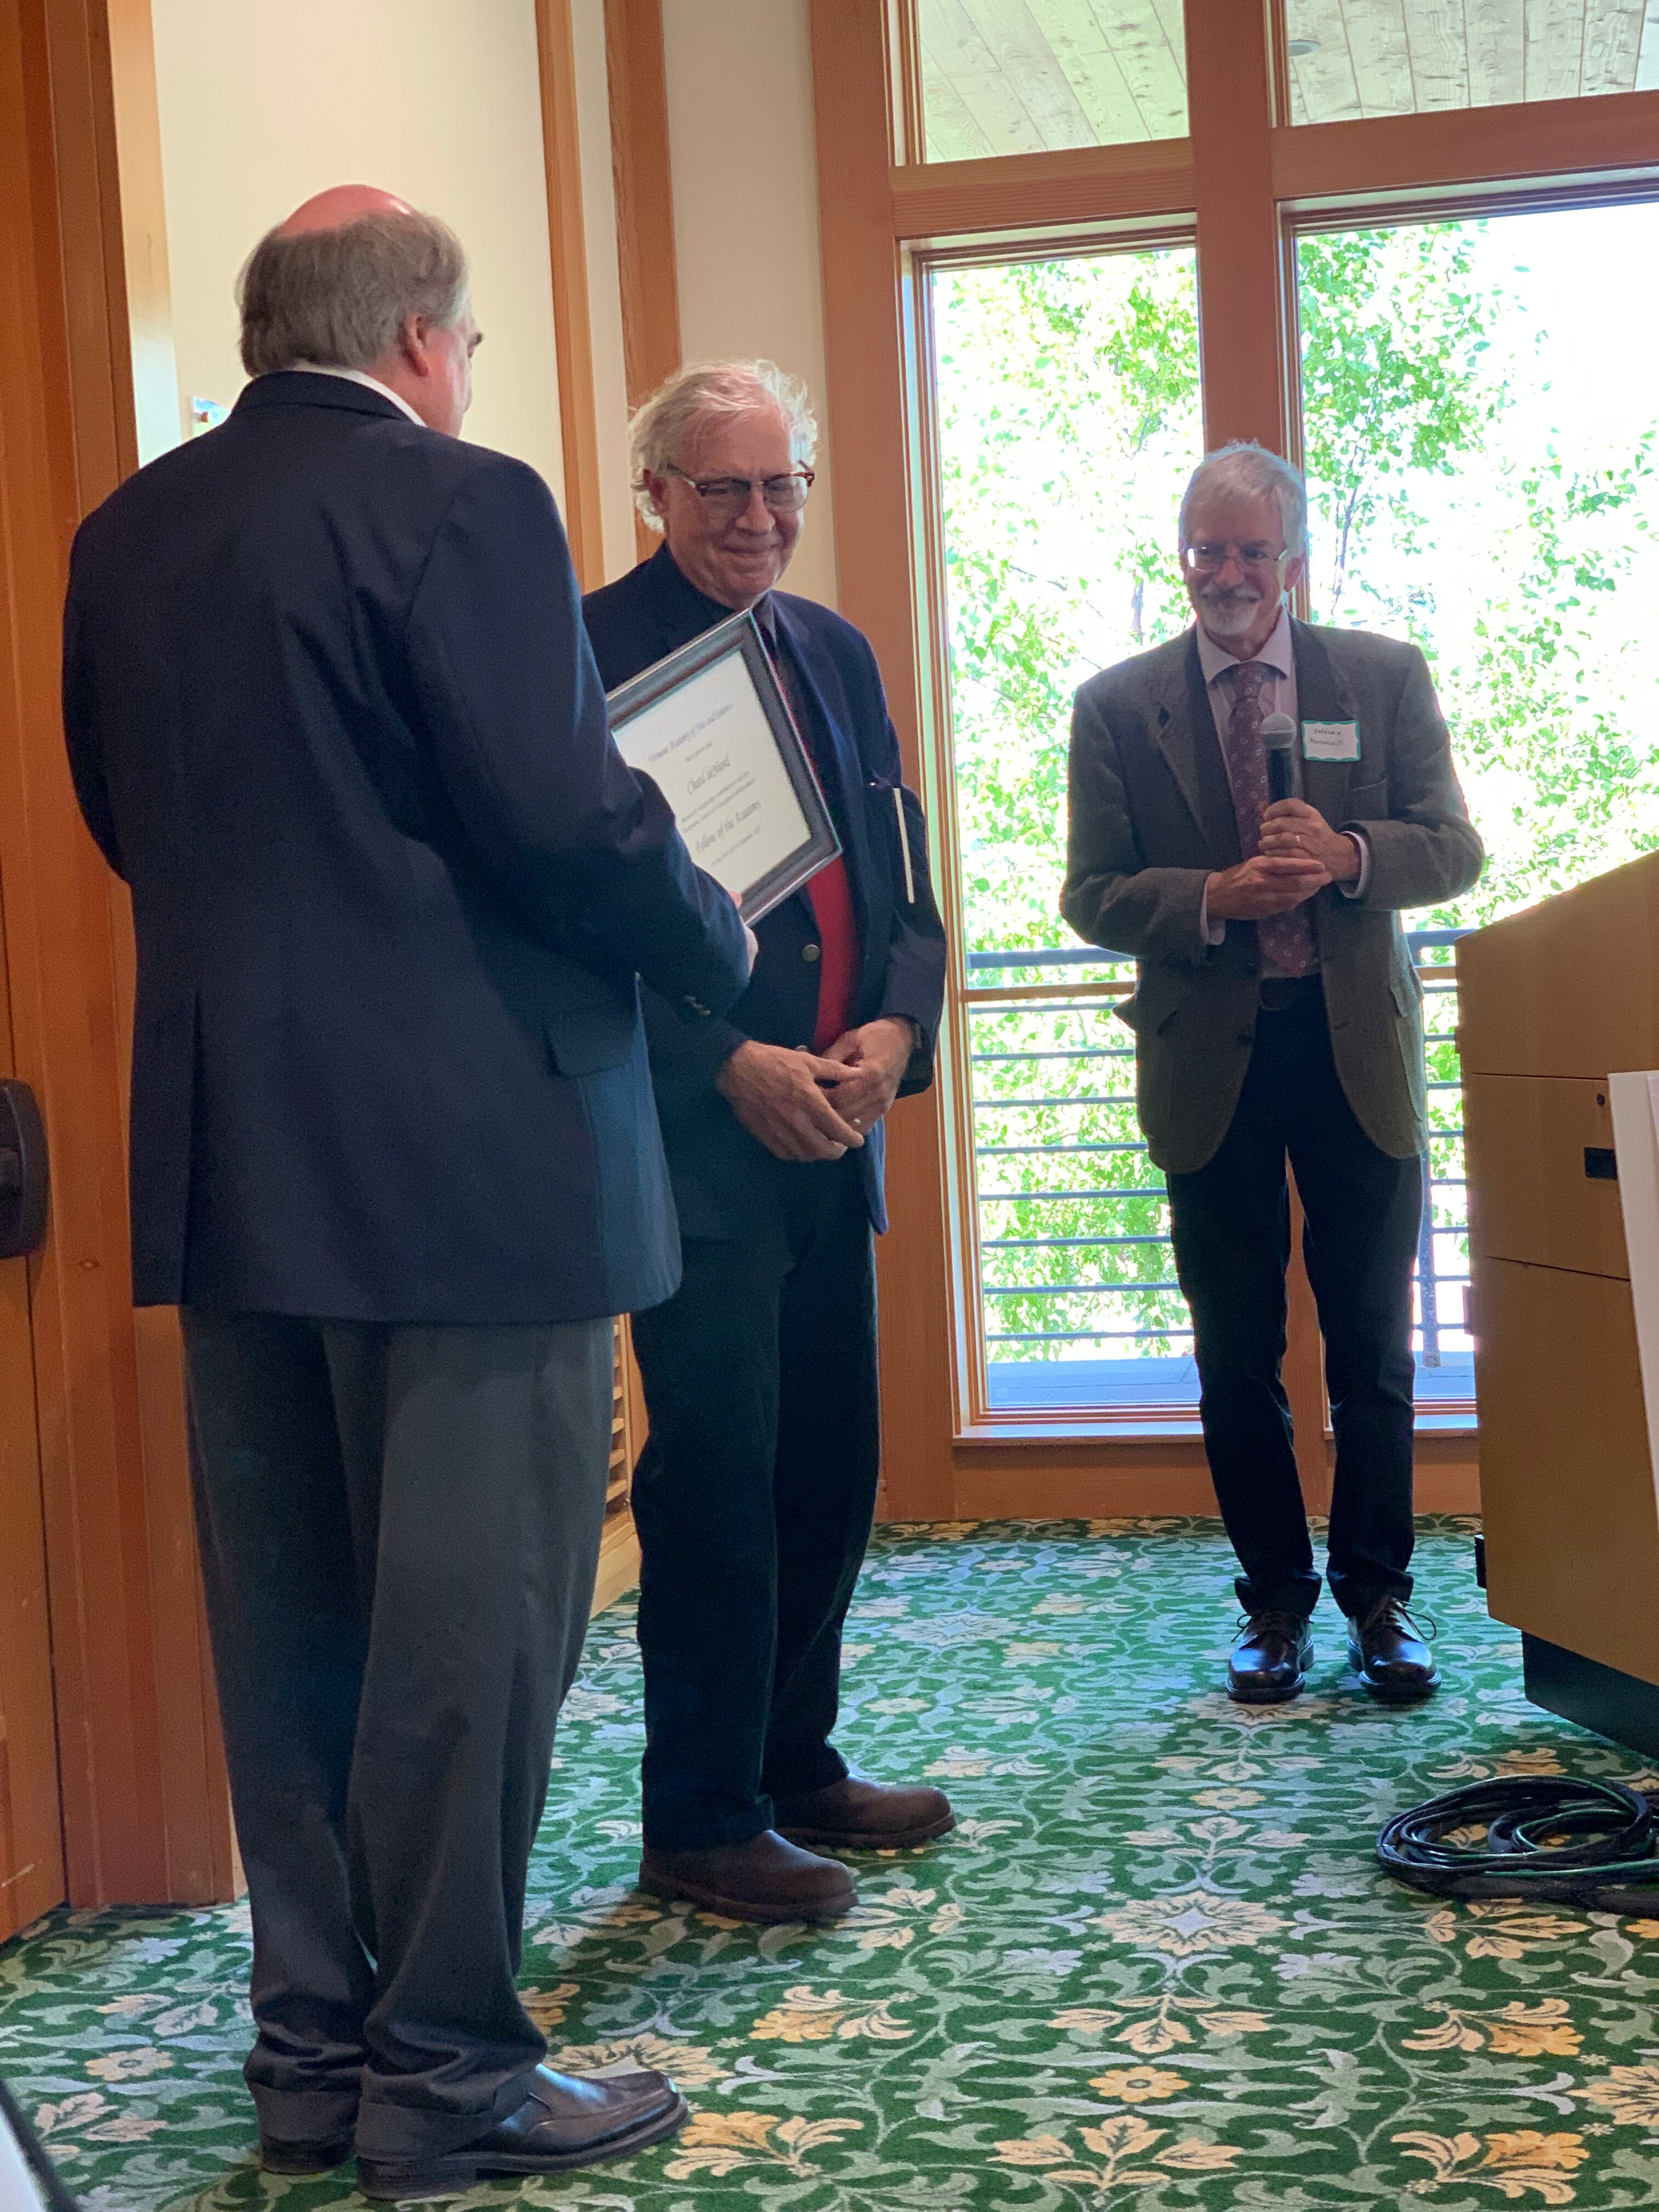 Author and Poet Laureate of Vermont, Chard deNiord is honored as a Fellow with Kevin Fleming and Jeff Marshall presenting